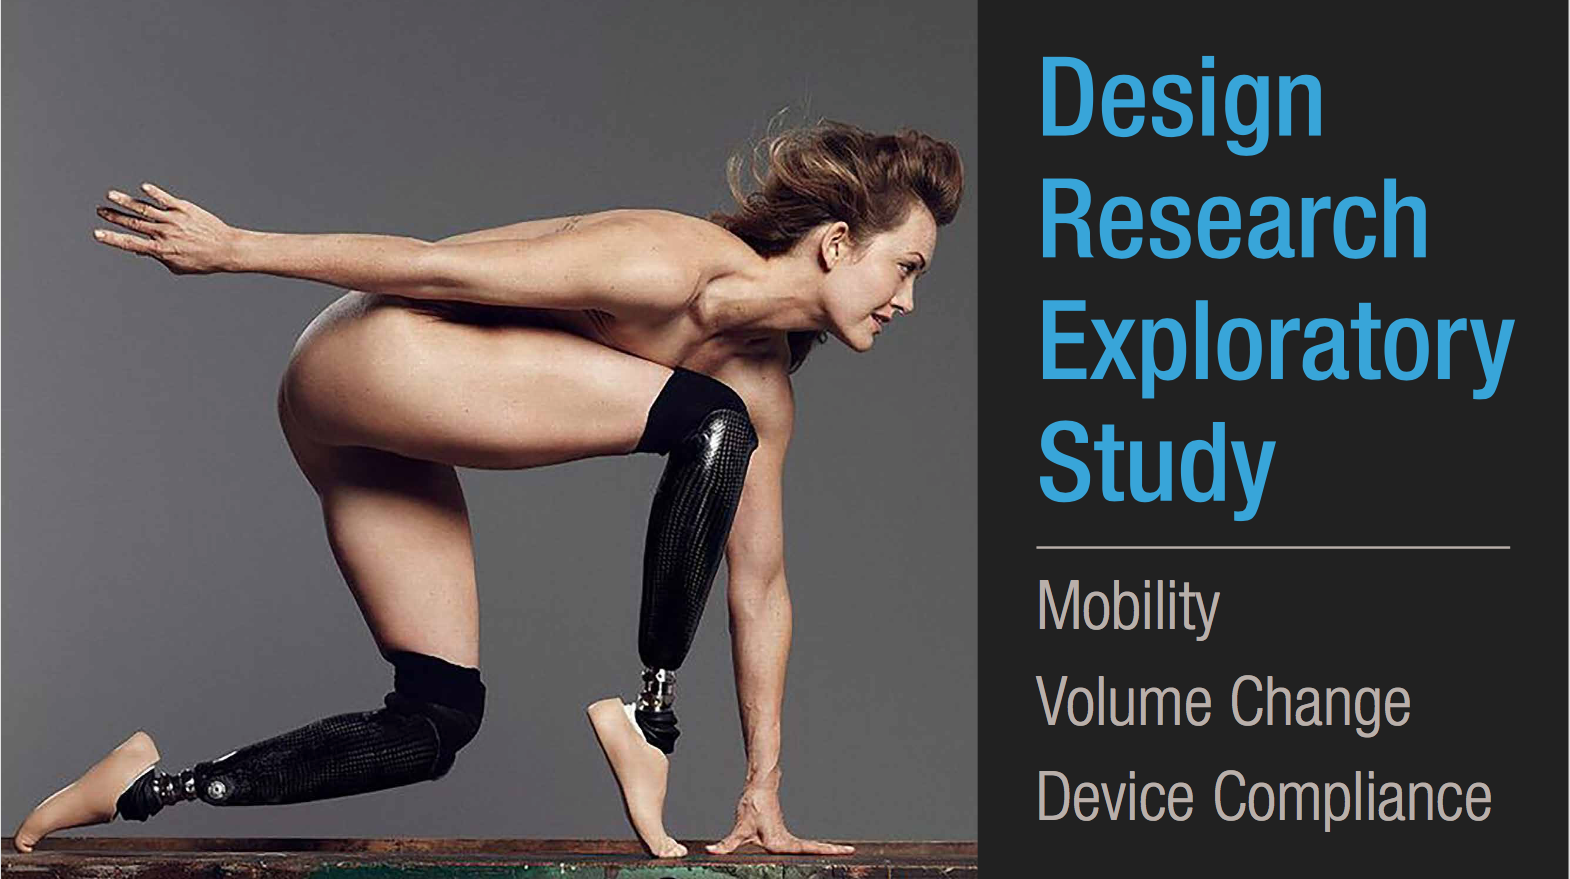 Smart Lim Design Research Exploratory Study: Volume and Mobility Change